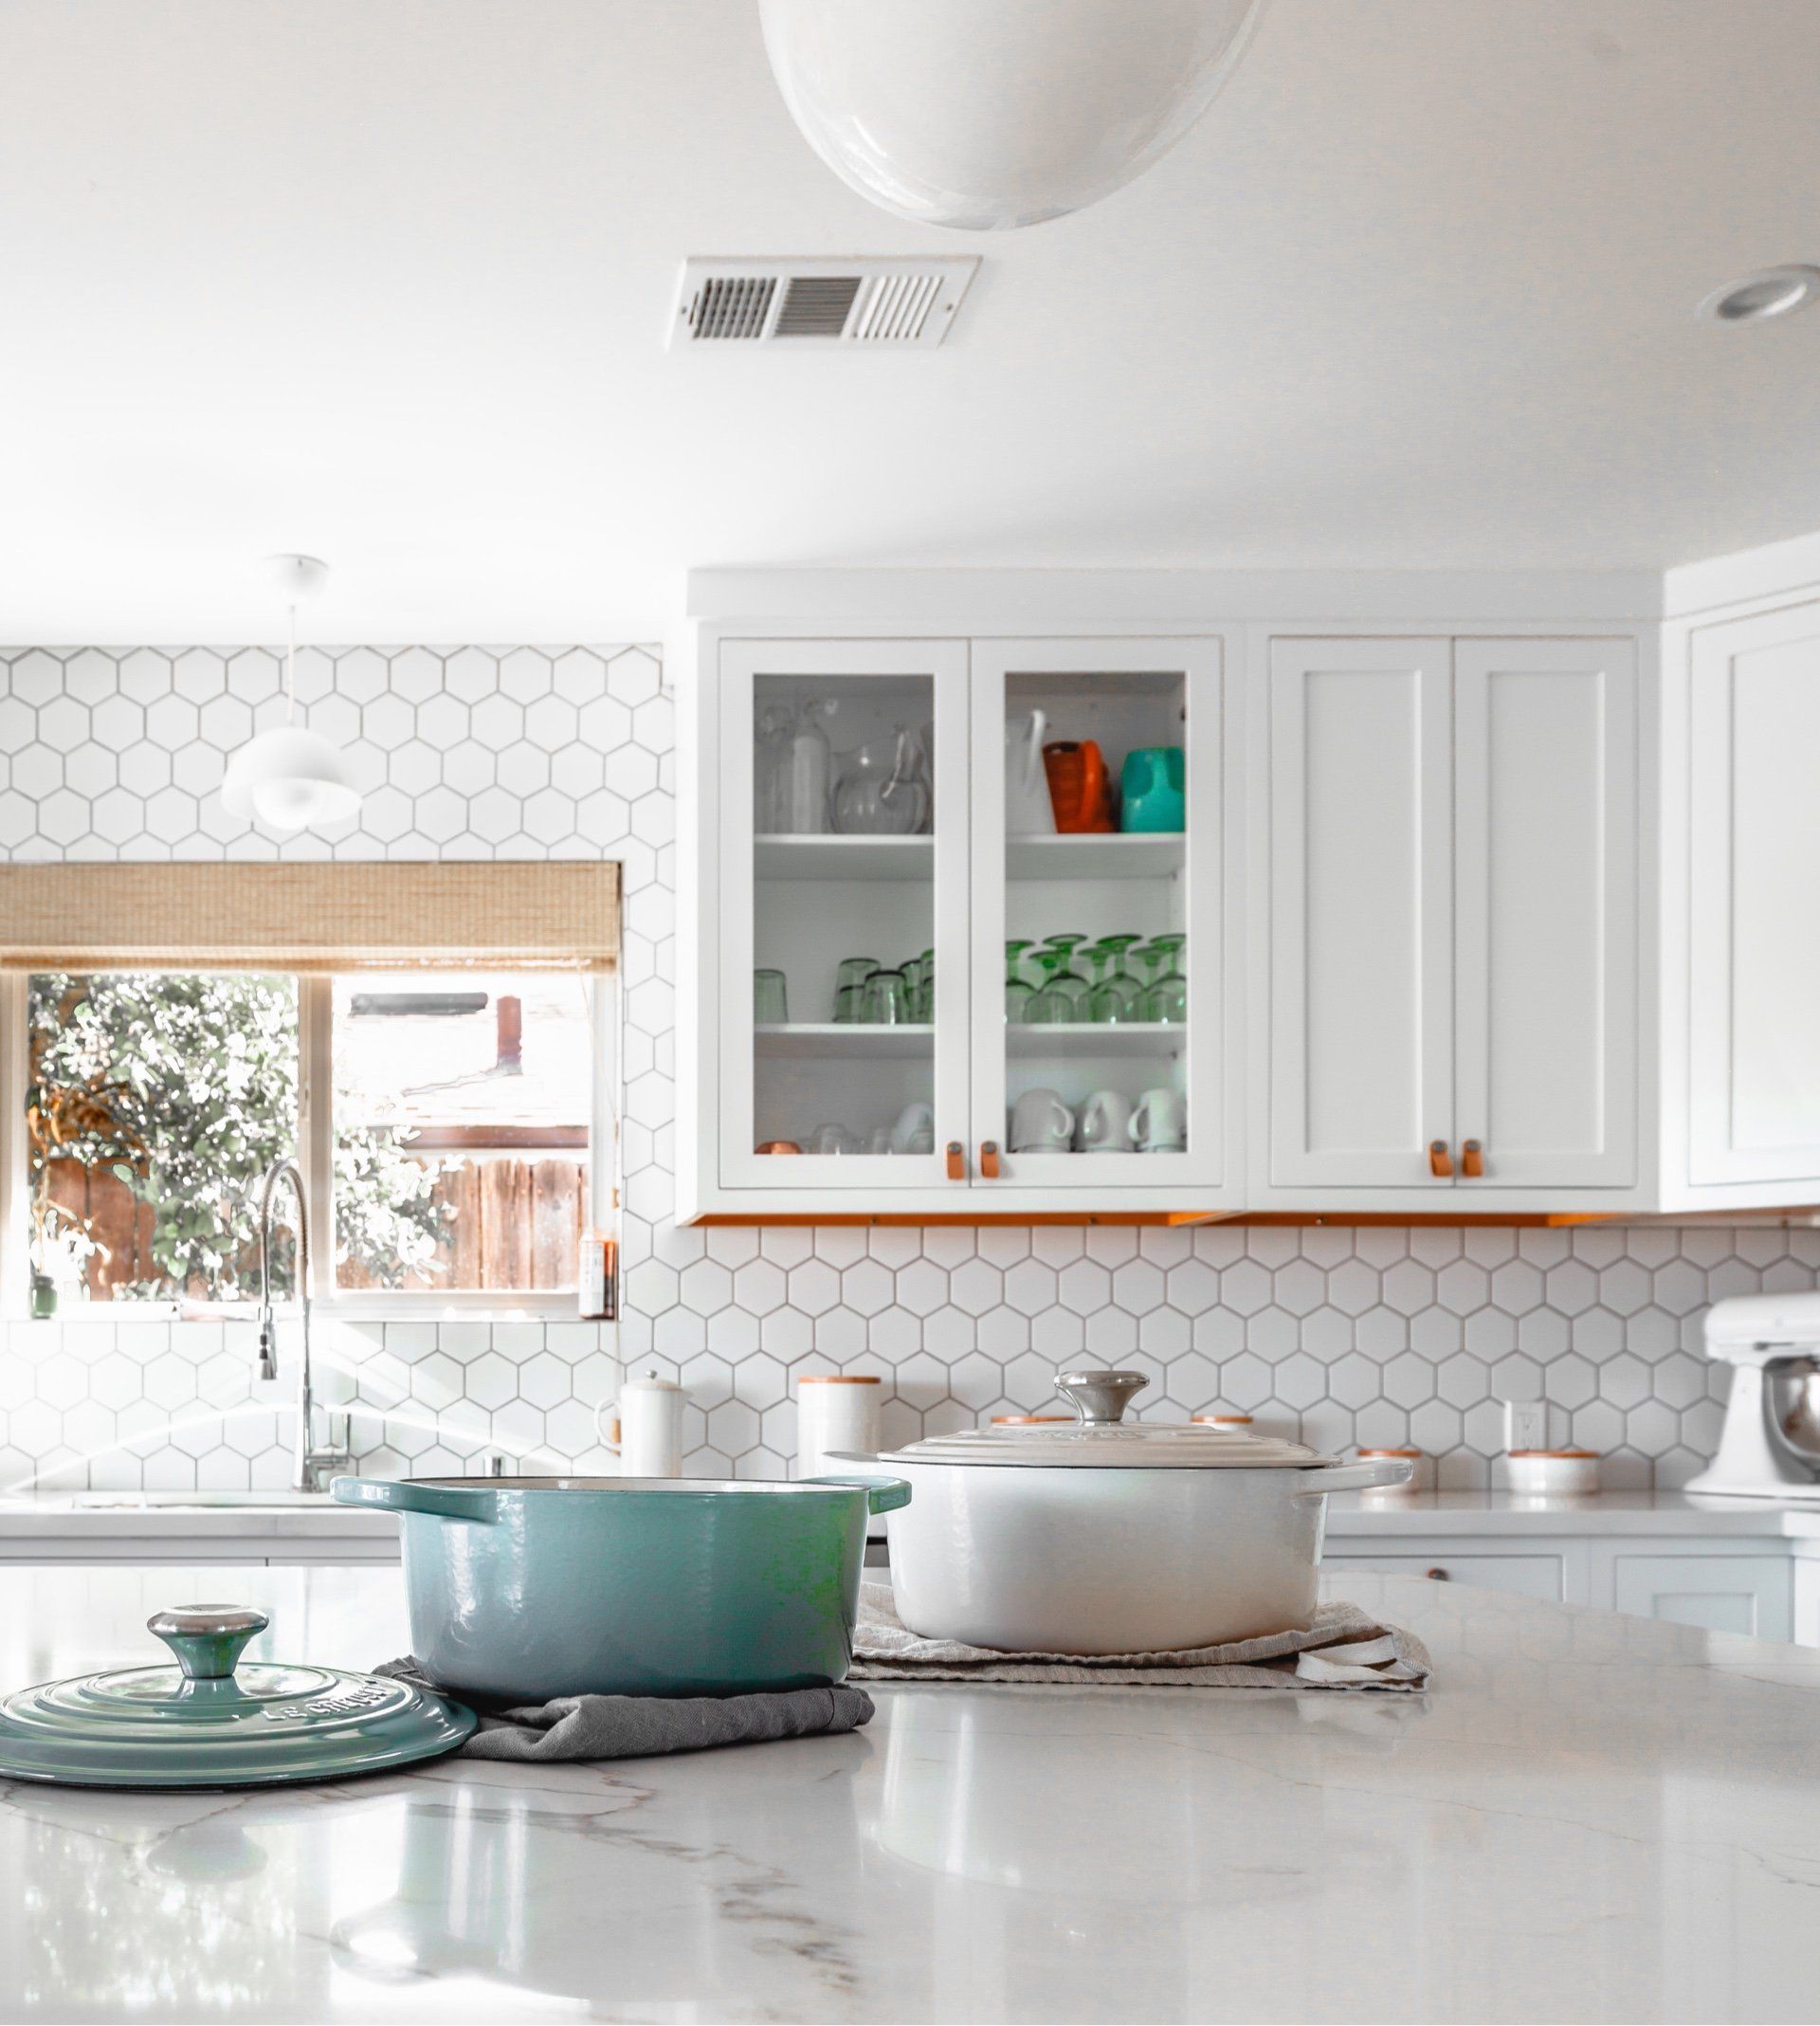 A kitchen with white cabinets , a mixer , pots and pans on the counter.